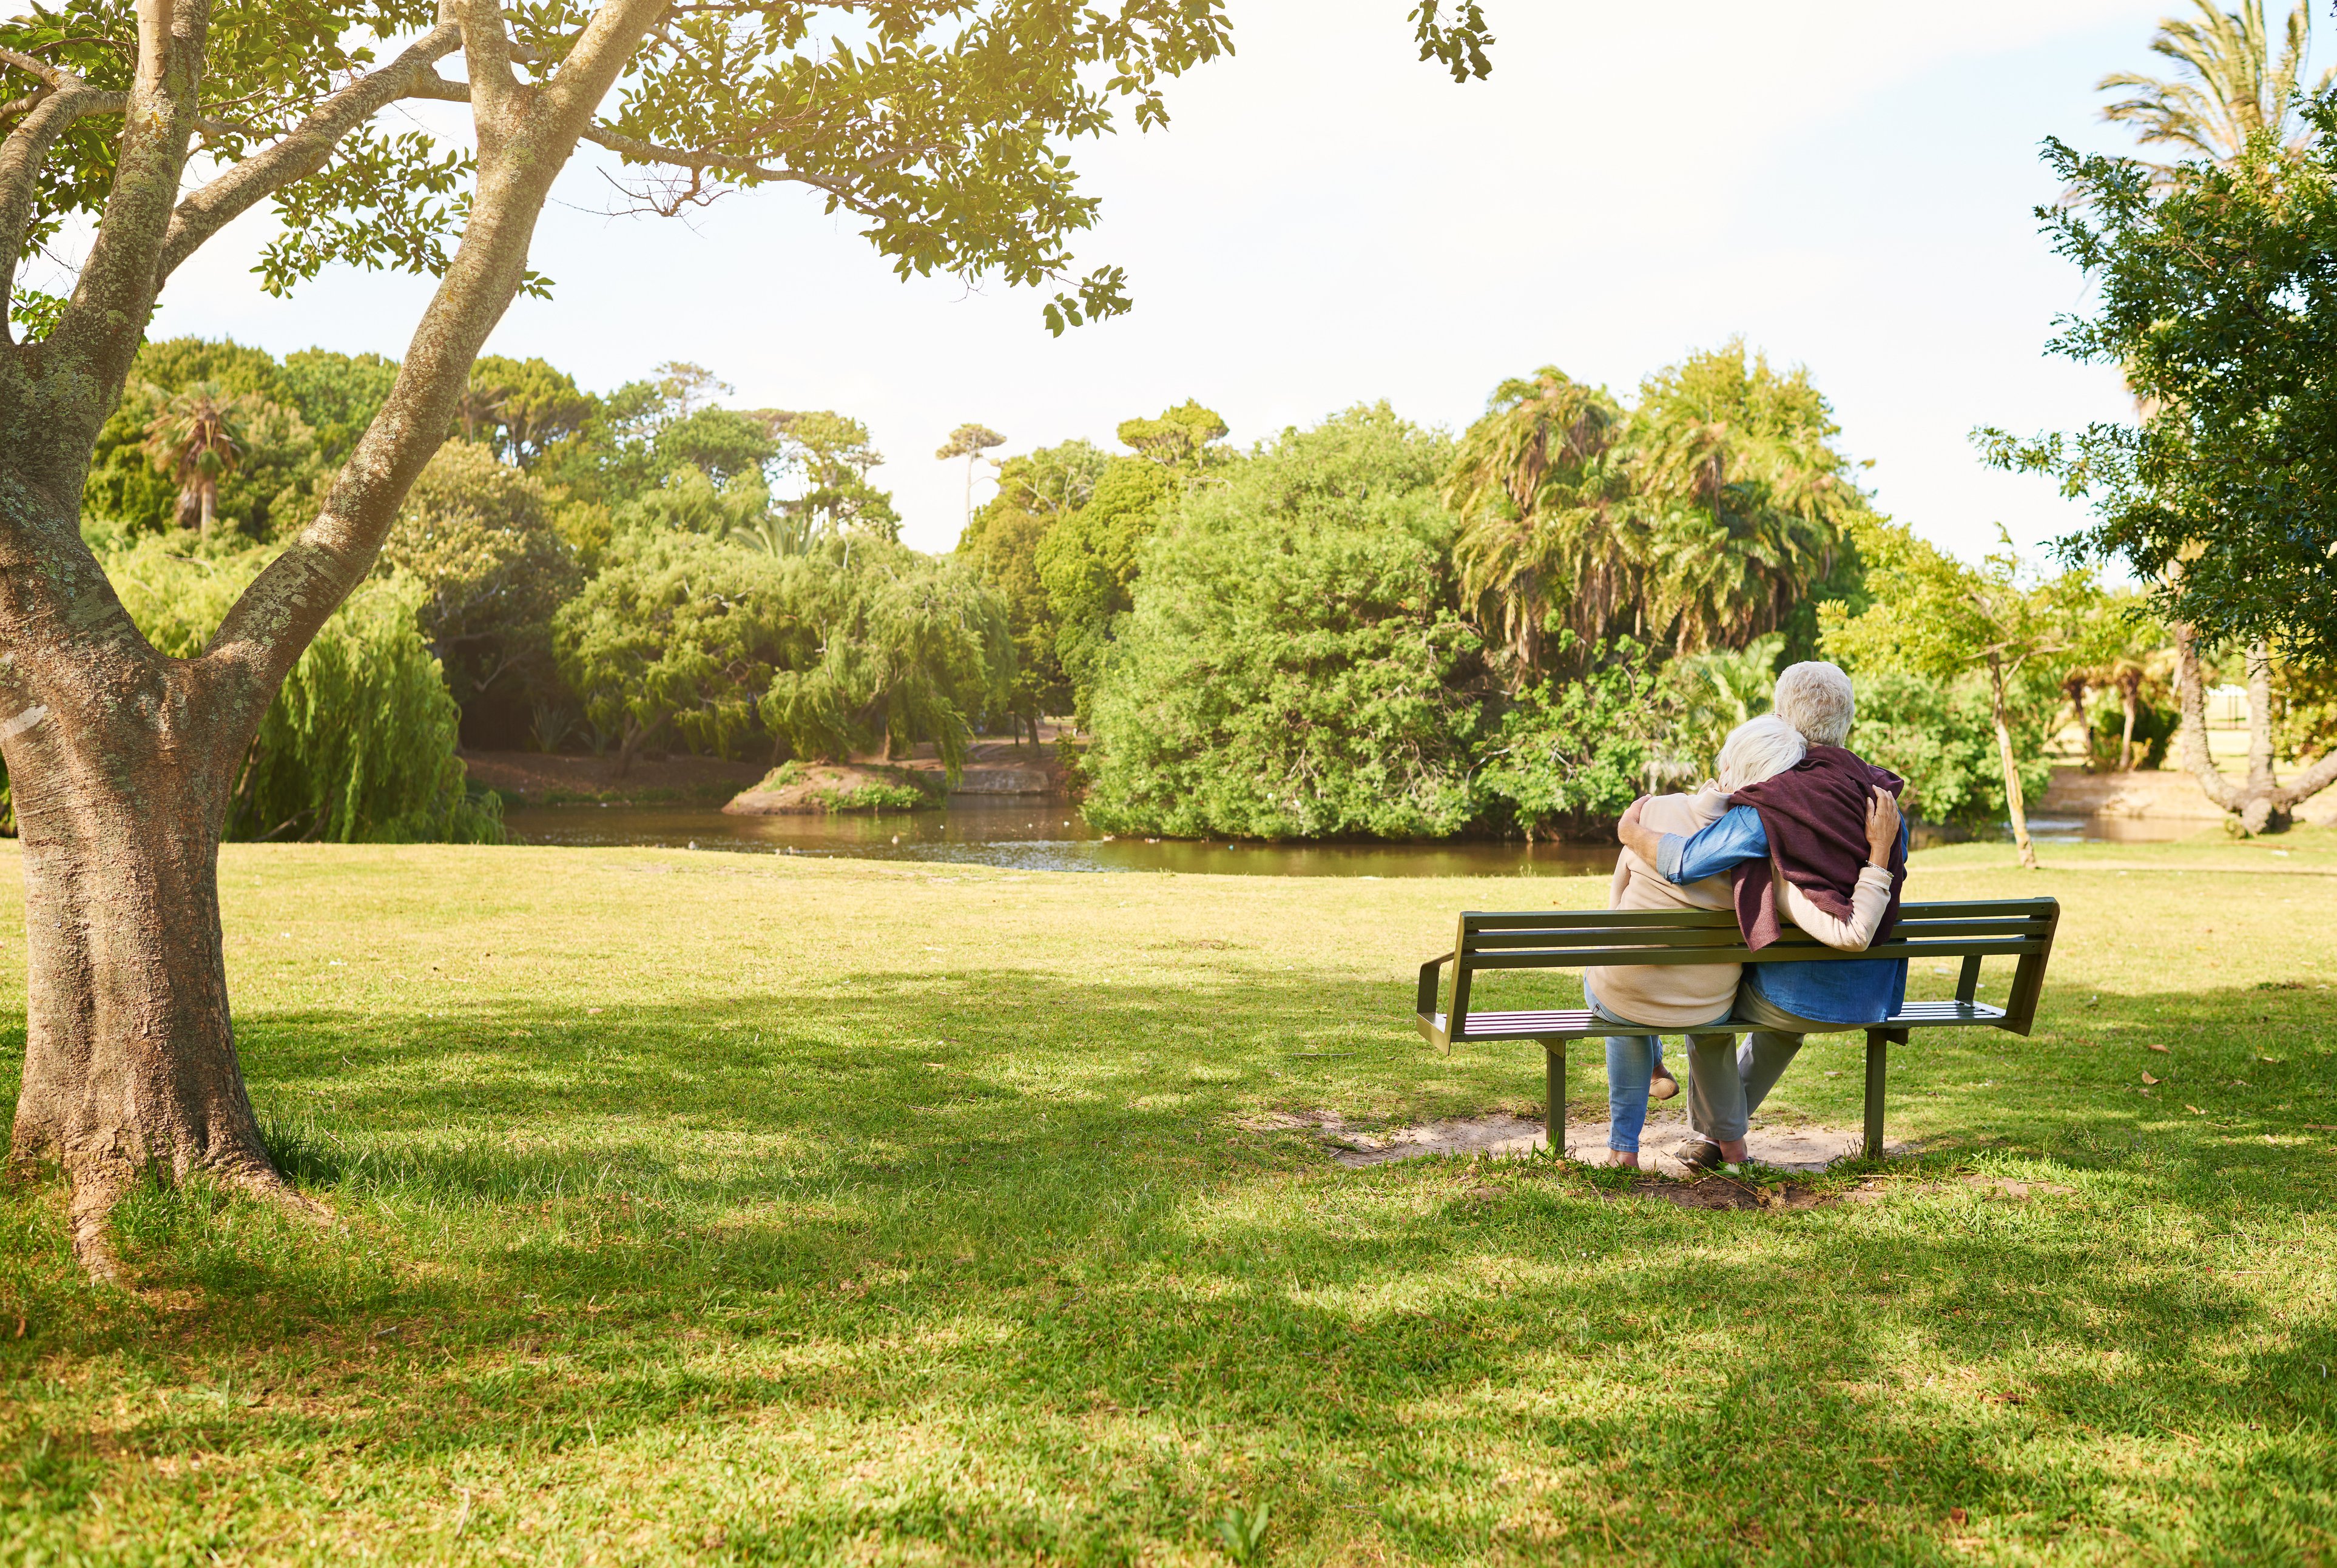 Elderly couple sitting next to one another on a park bench enjoying their time together